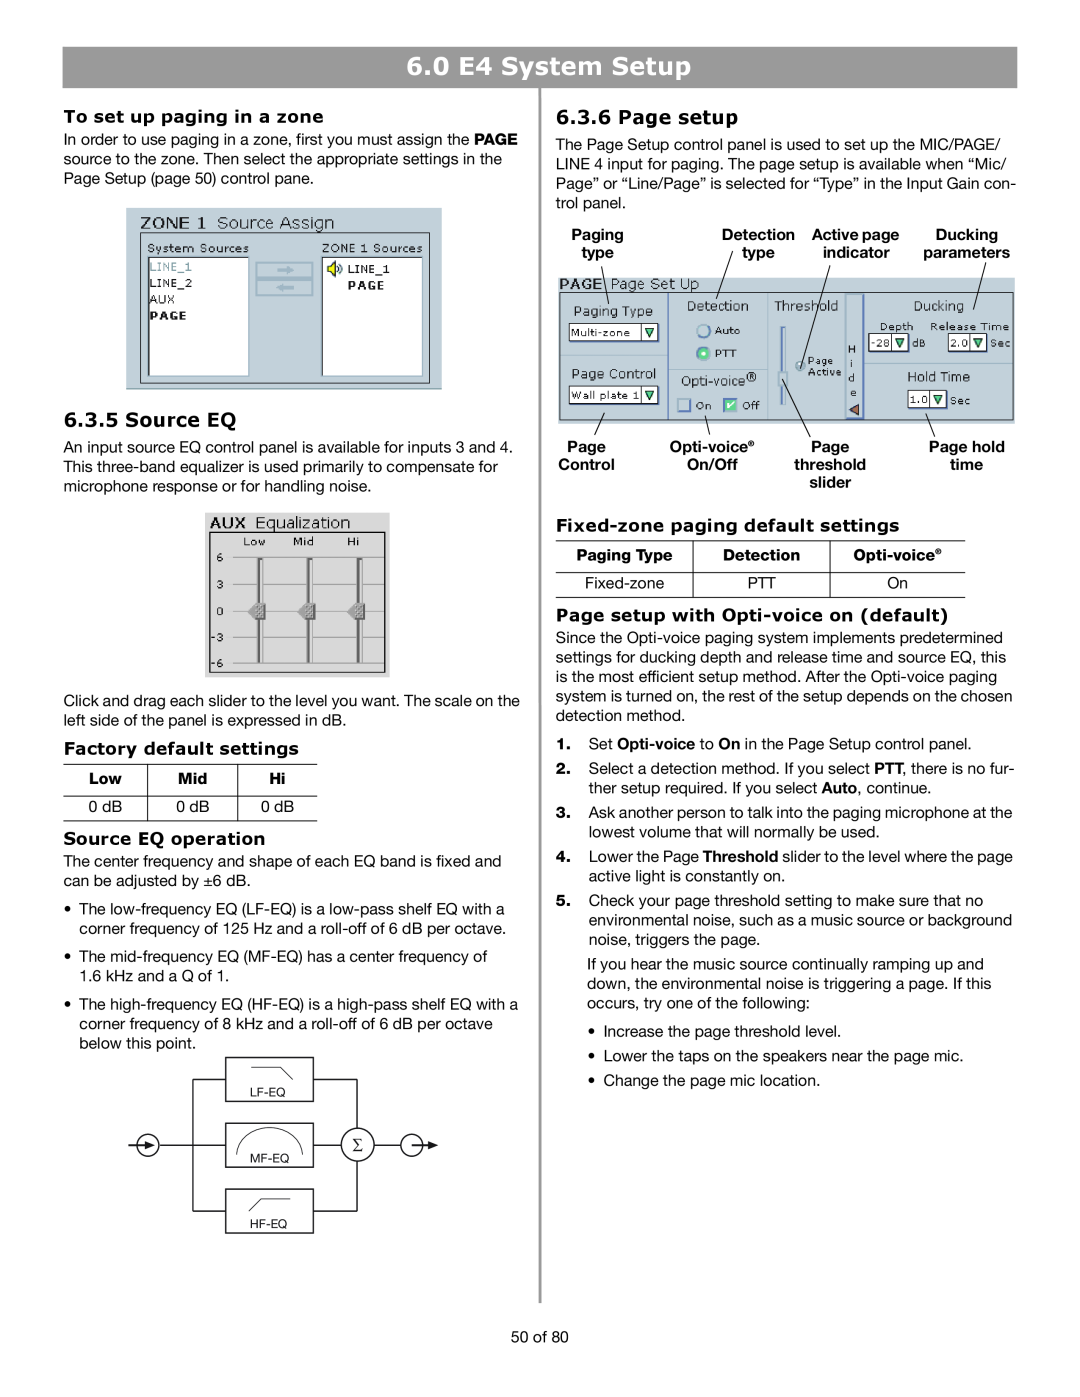 Bose E4 manual Page setup, To set up paging in a zone, Source EQ operation, Fixed-zonepaging default settings 